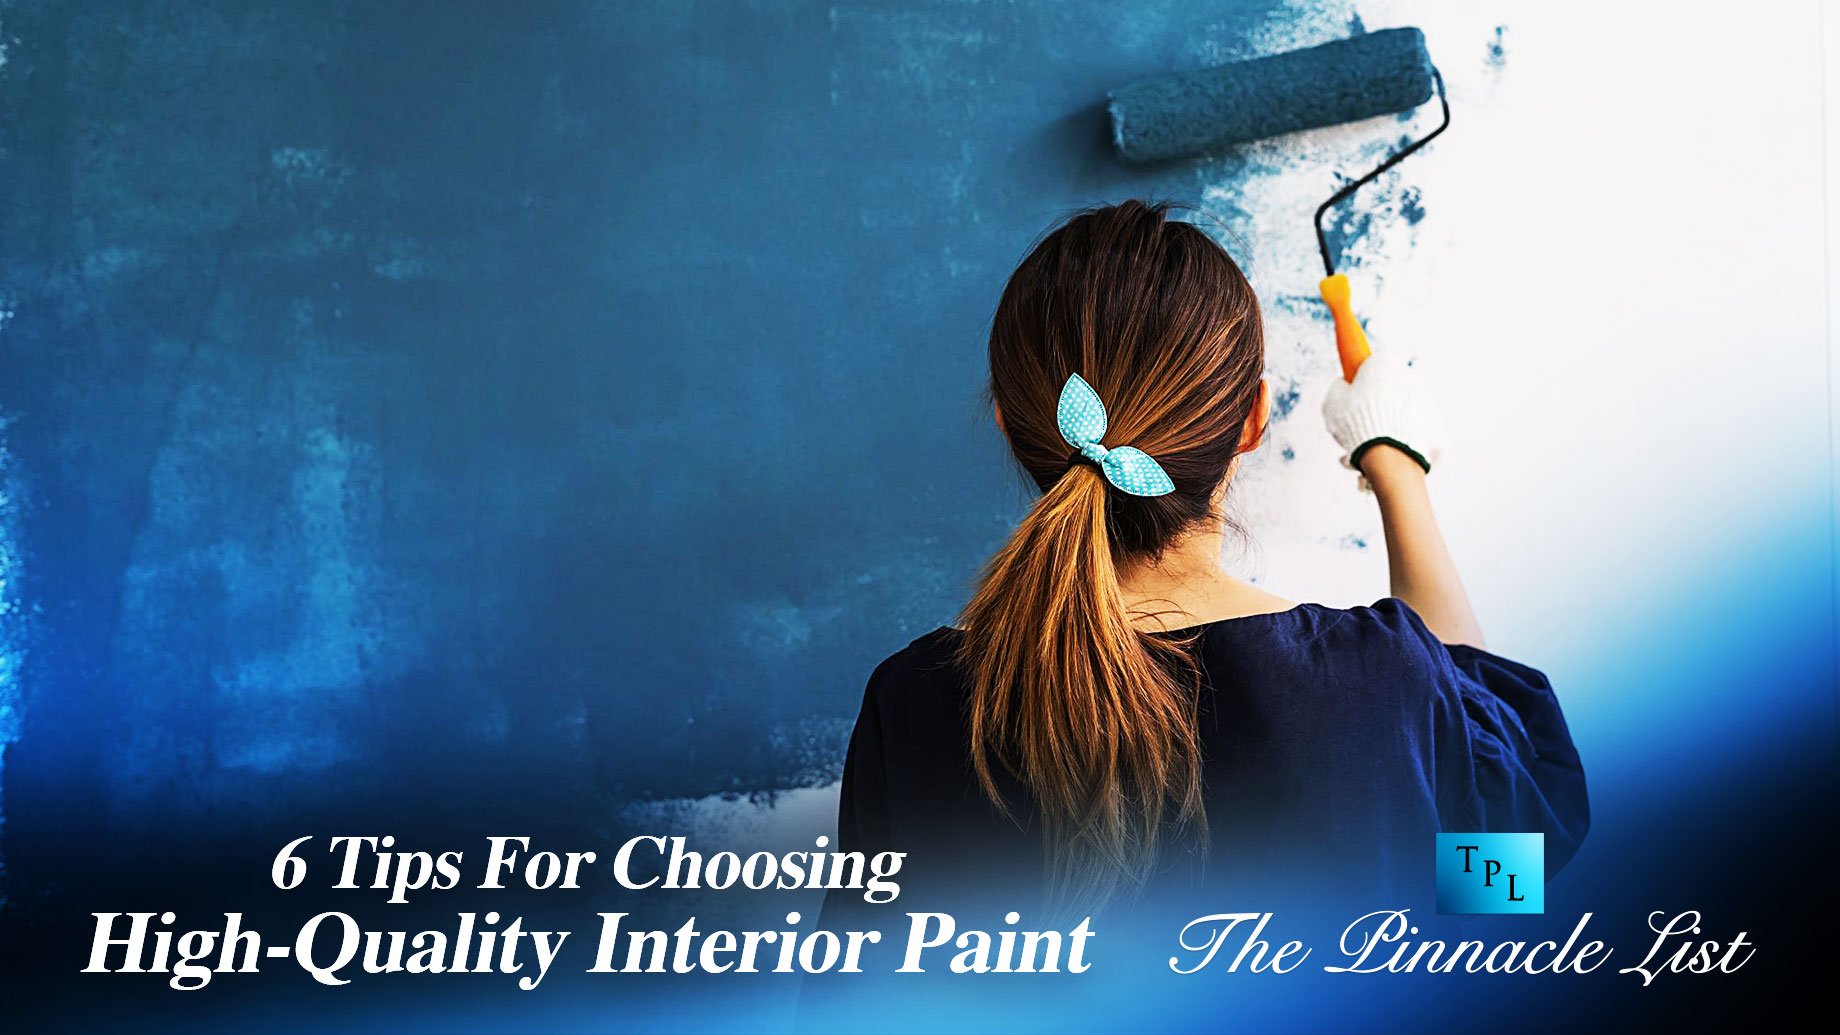 6 Tips For Choosing High-Quality Interior Paint